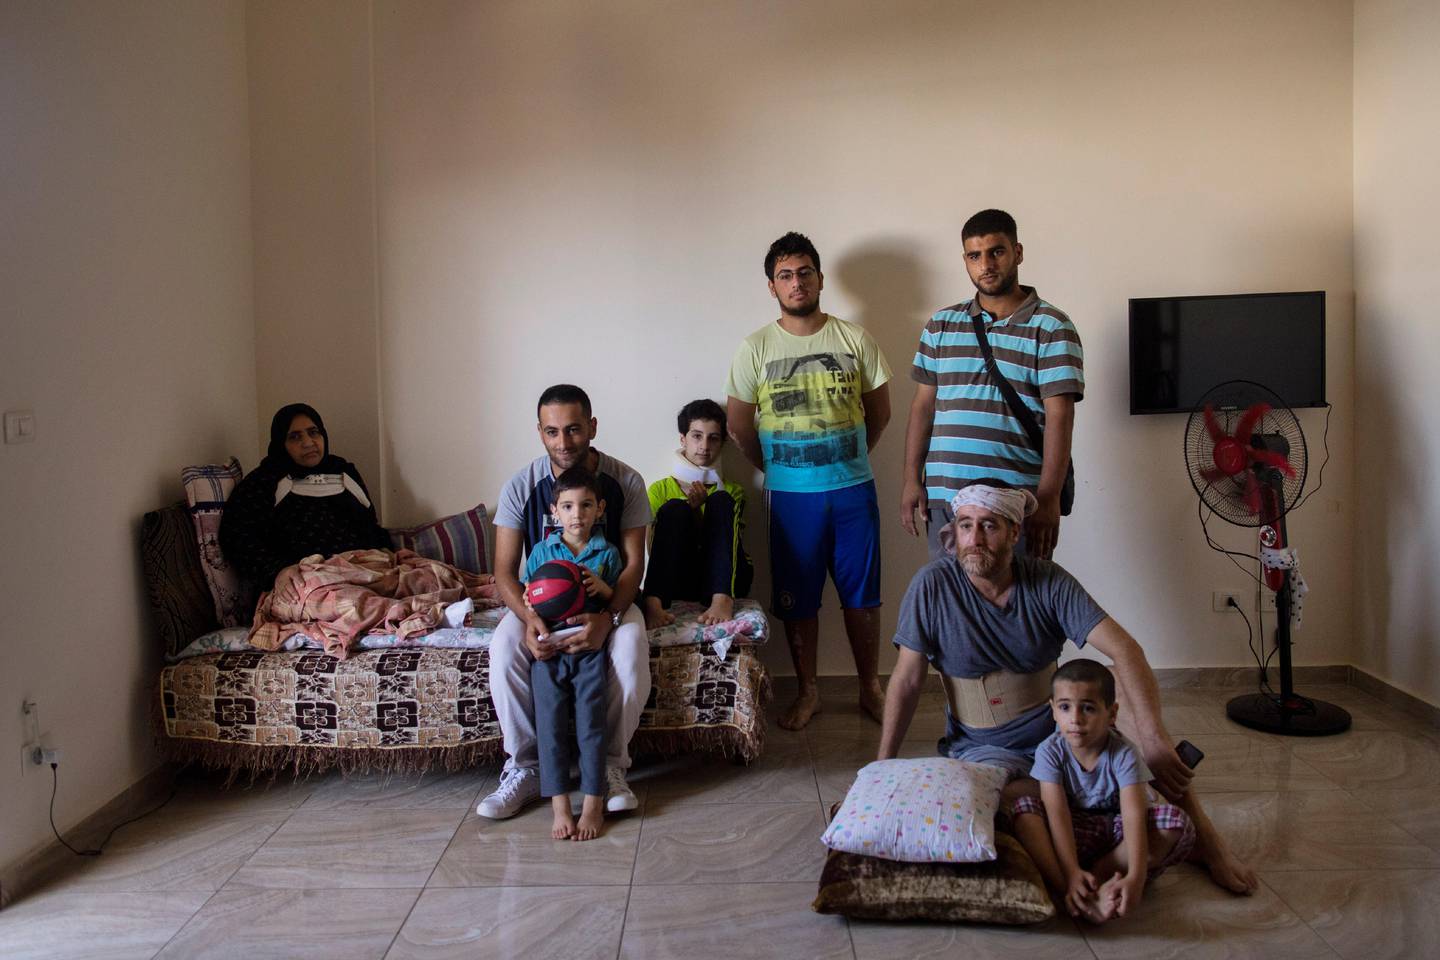 The family of Ali Kinno pose for a photograph from left to right, Fatmeh Kinno, 45, Mahmoud, 25, Hoda 11, Qoteiba 17, Mustafa, 28, Ali, 45, Ahmad, 6 during an interview at a temporary apartment in the coastal town of Jiyeh, south of Beirut, Lebanon, Tuesday, Sept. 15, 2020. The Kinno family from Syria's Aleppo region was devastated in the wake of the Aug. 4 explosion at the Beirut port, their tragic story reflects the particular pain of Syrian refugee families in Lebanon, which is now home to about a million Syrians.  (AP Photo/Hassan Ammar)